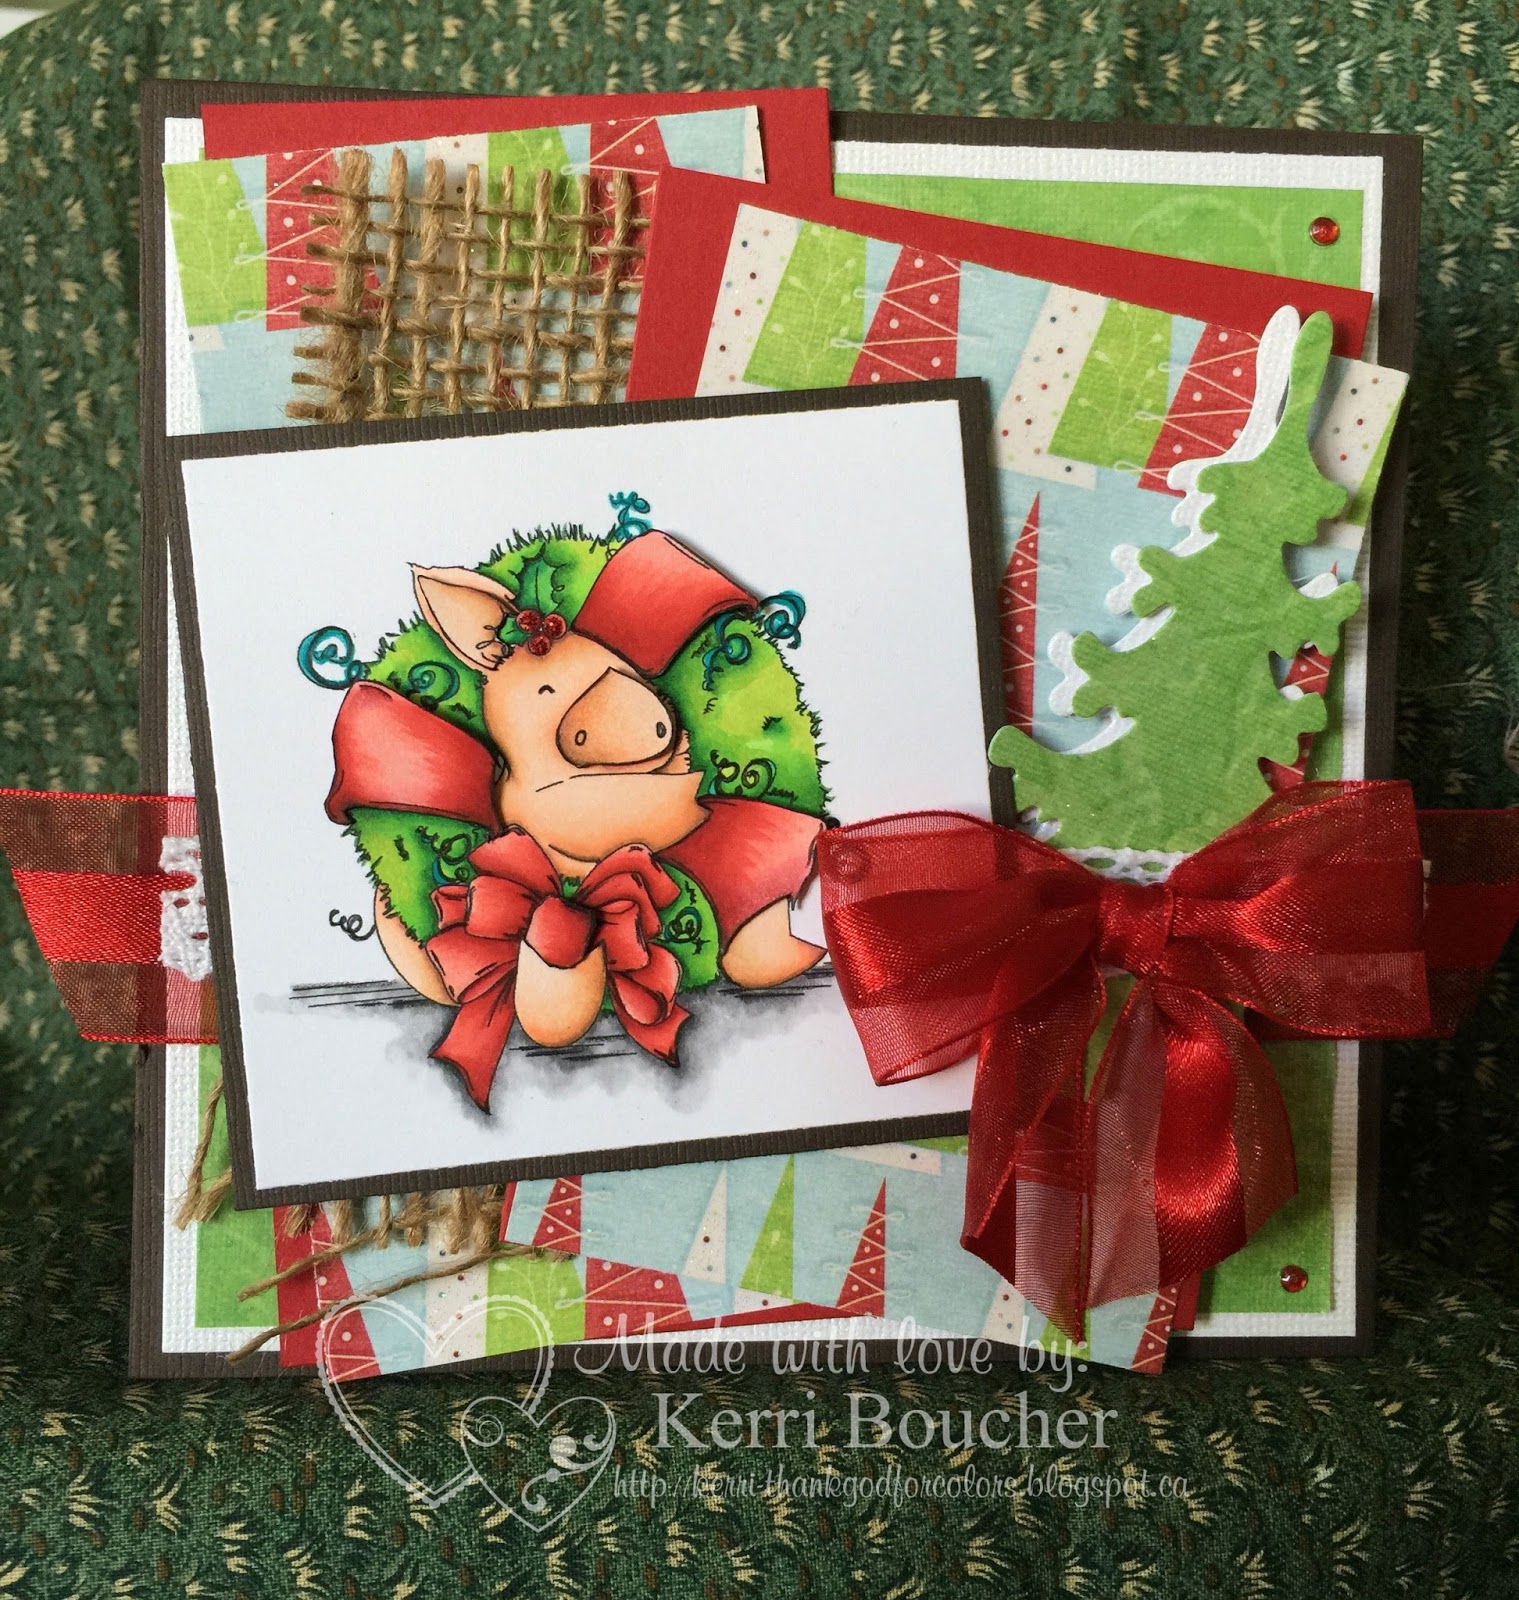 Stamping Bella Petunia loves Christmas rubber stamp. Click through for blog post with inspiration!